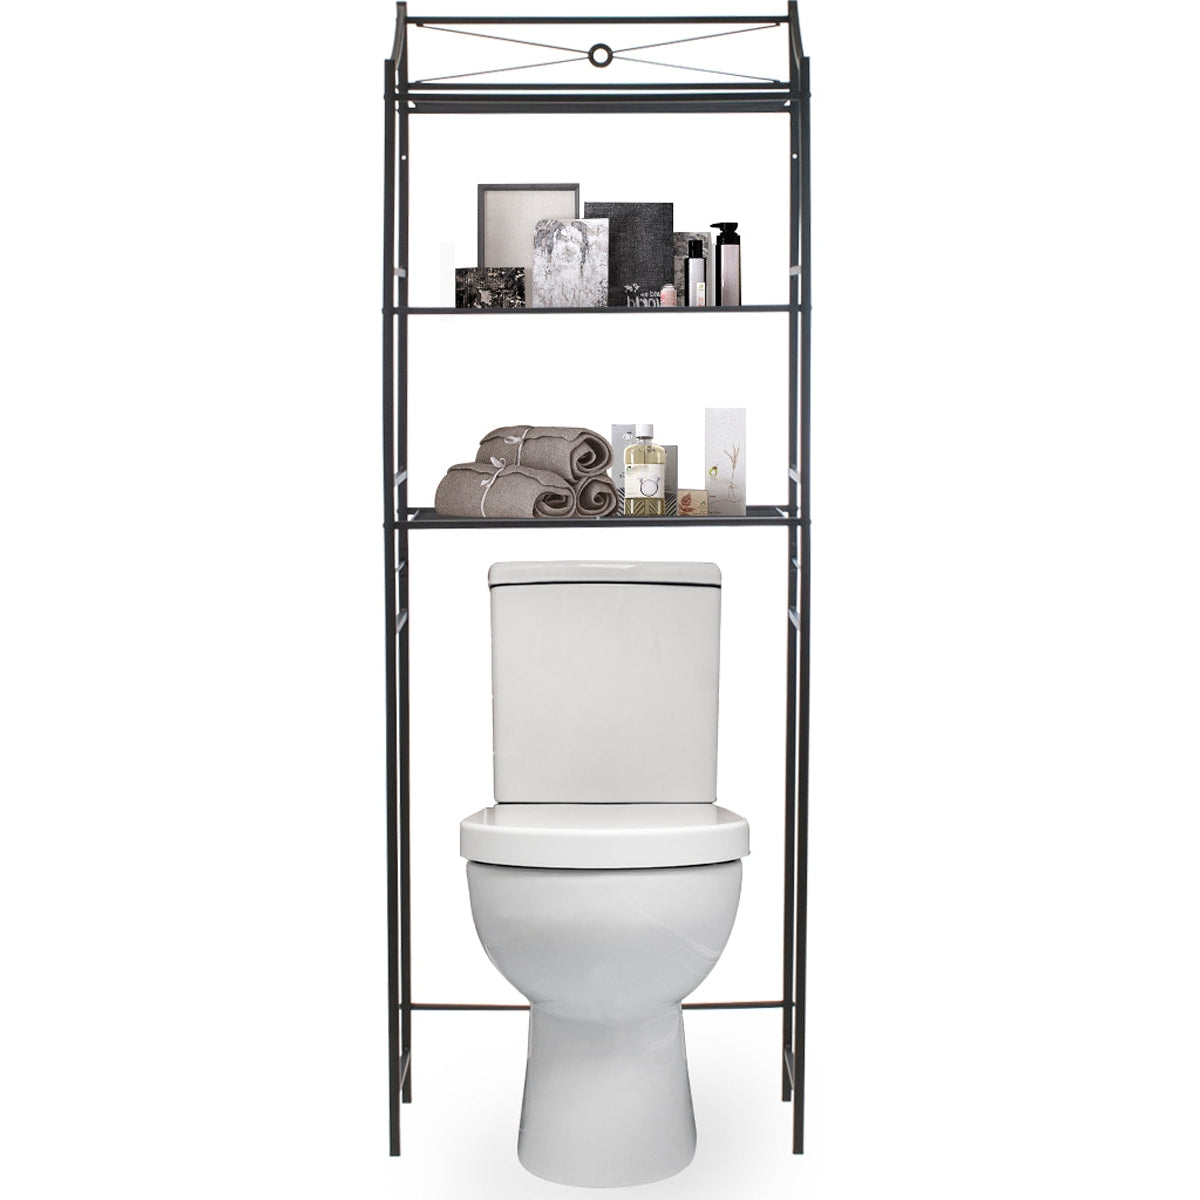 Bathroom Storage Over The Toilet Space-Saver - Sorbus Home